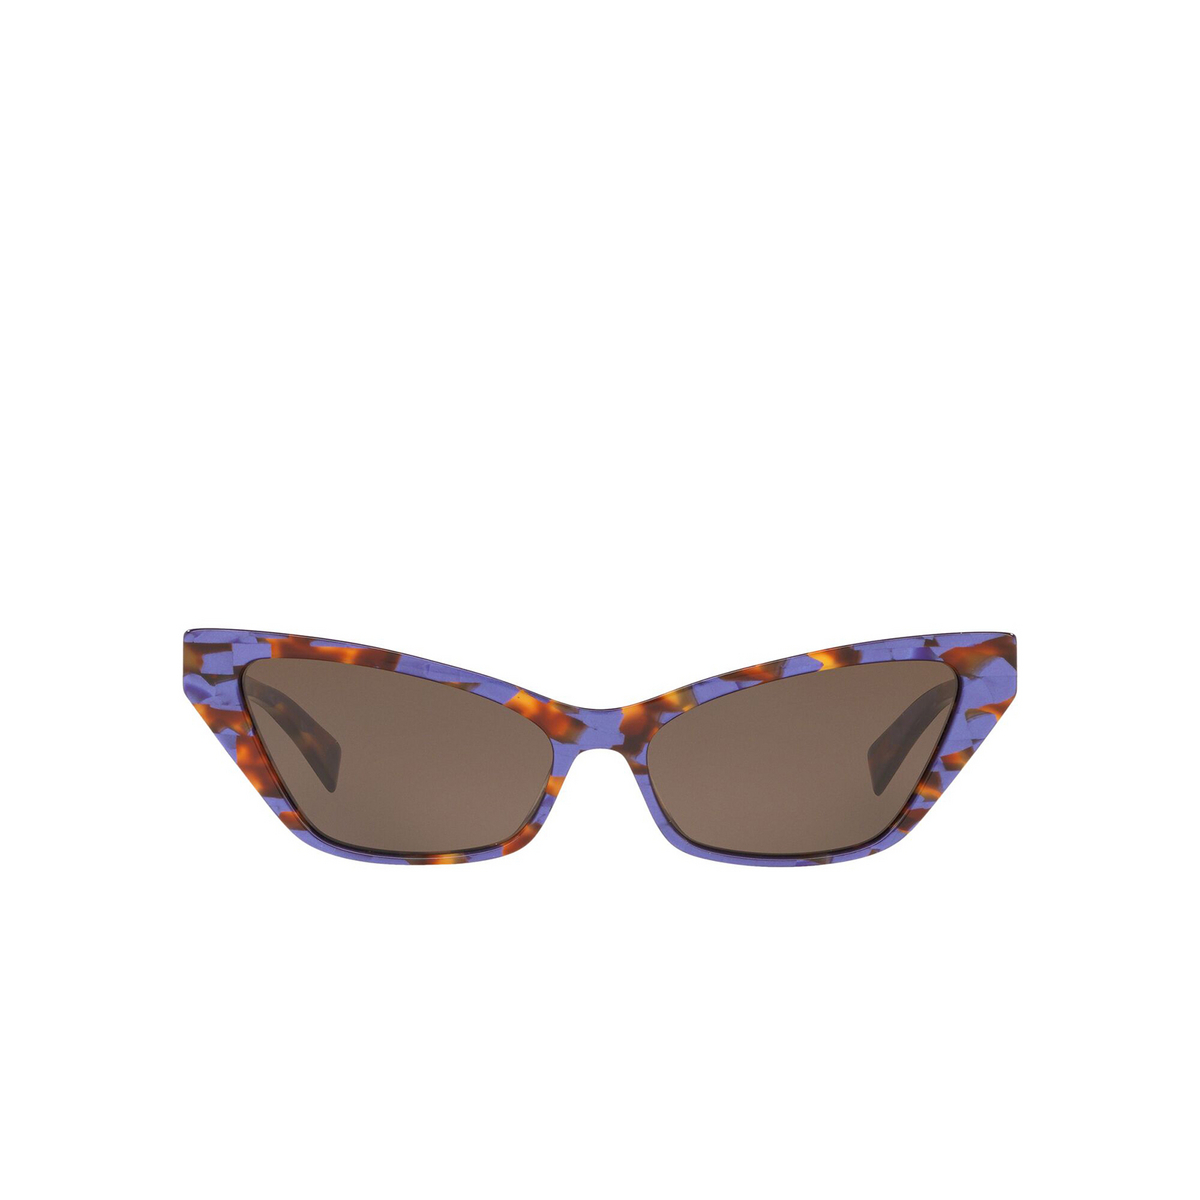 Alain Mikli® Cat-eye Sunglasses: Le Matin A05036 color Violet Spotted Tortoise 010/73 - front view.